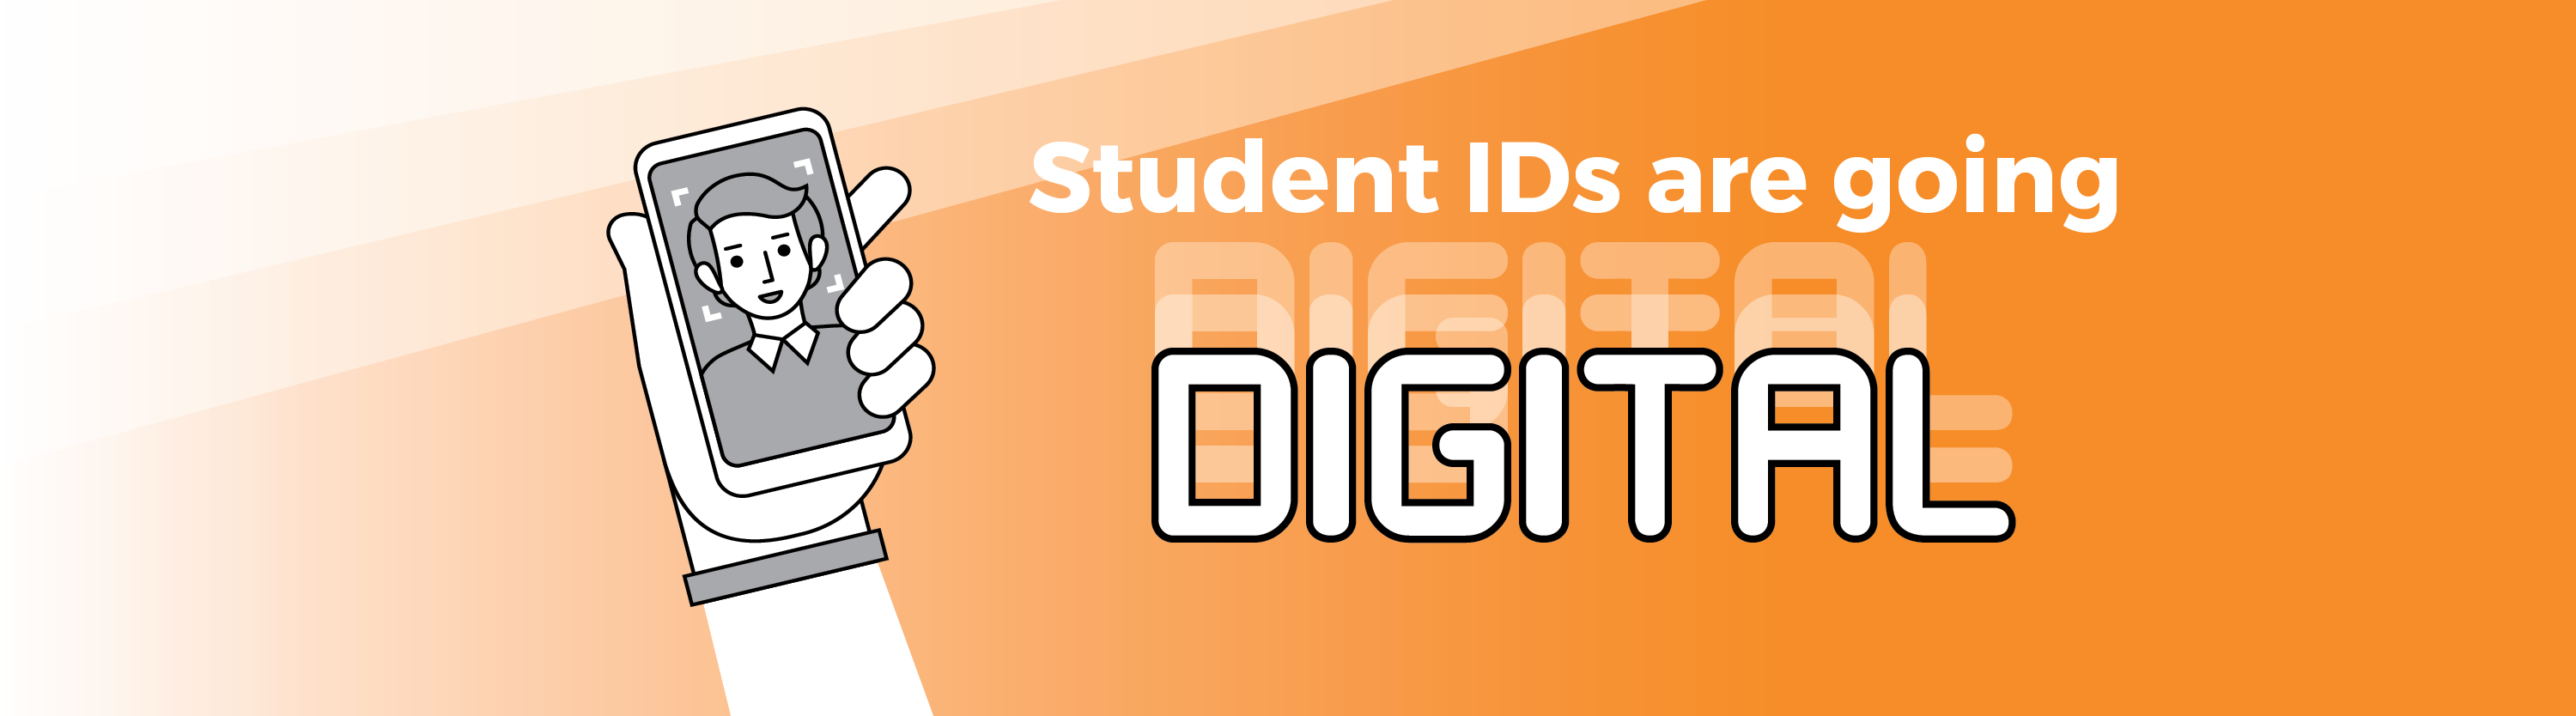 student ids are going digital